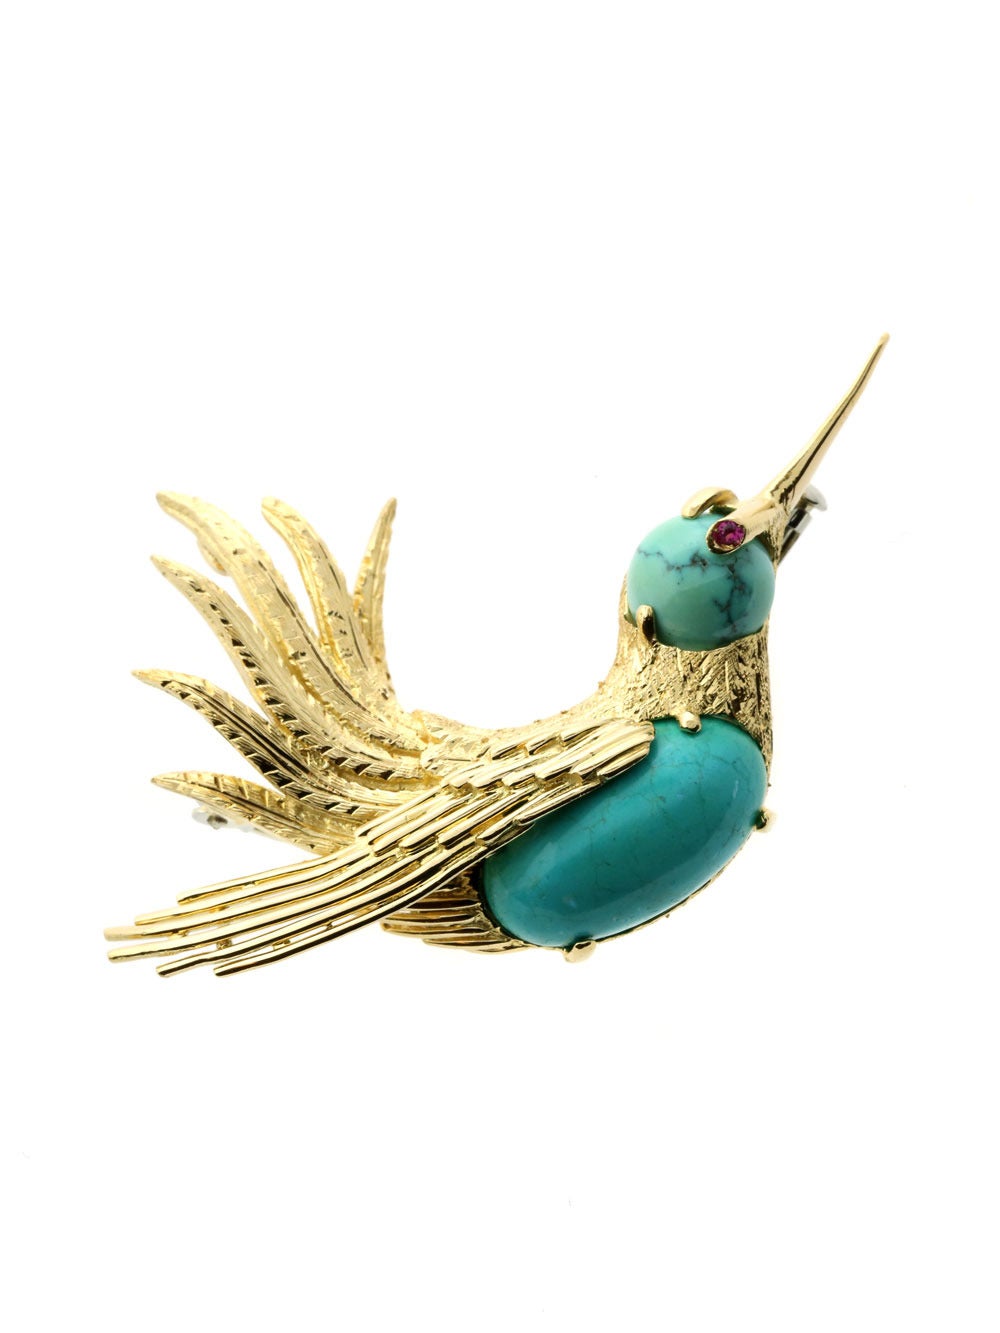 A marvelous authentic Cartier Hummingbird brooch accented with a smooth turquoise body and sparkling ruby set in 18k yellow gold.

Dimensions: 2.16″ wide by 1.53″ in length
Condition: As New (Professionally Cleaned & Polished By